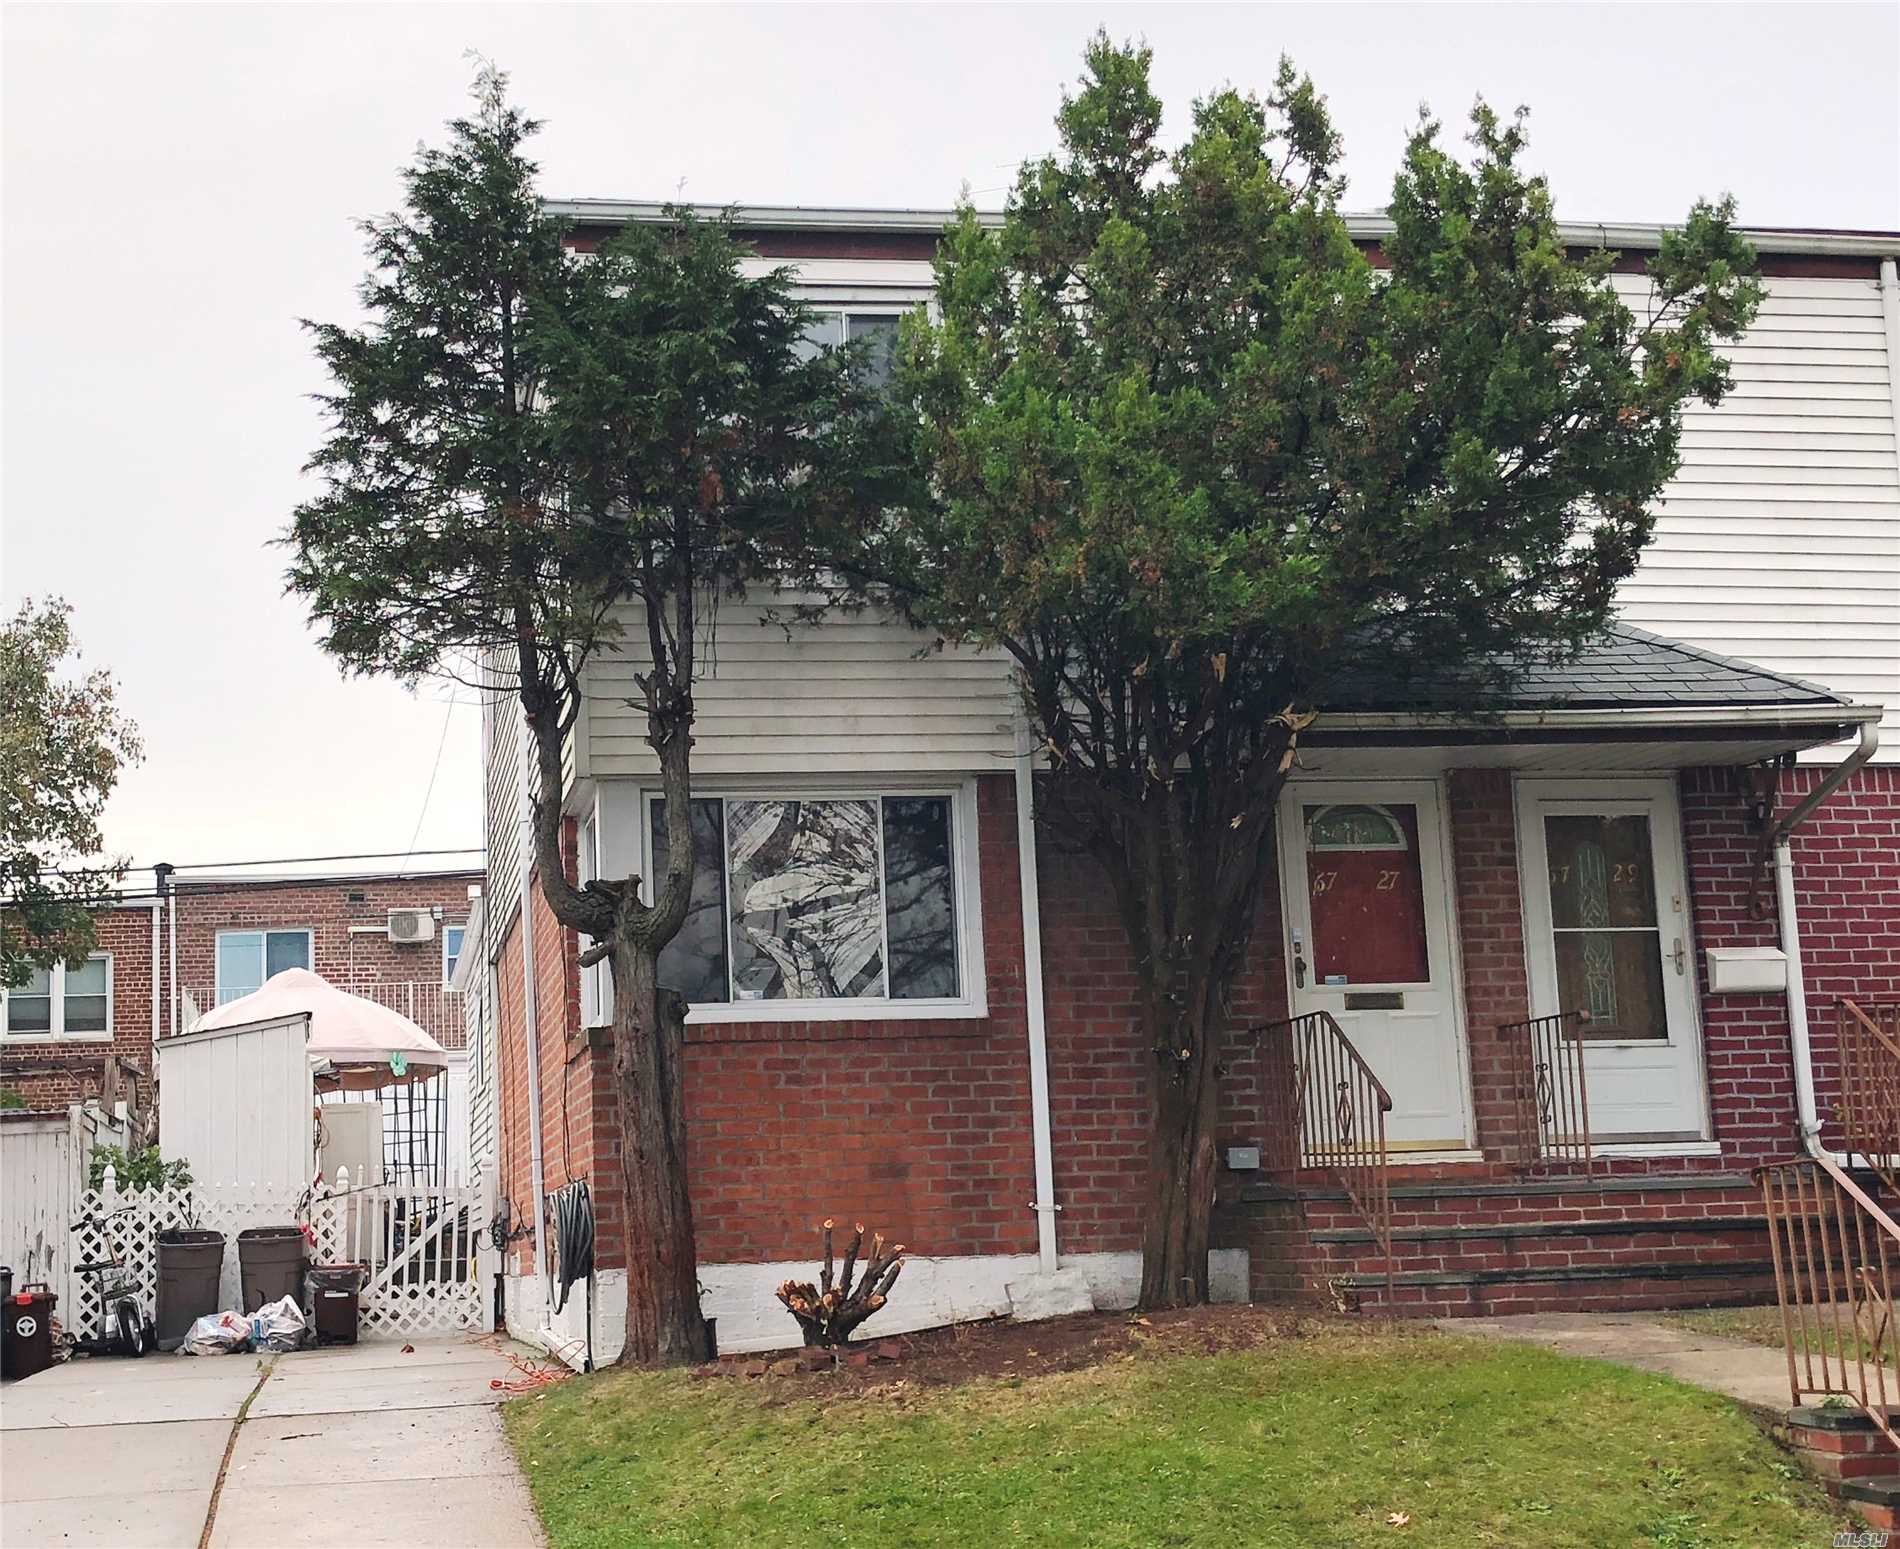 This Semi-Detached Brick Colonial Is The Ideal Starter Home! A Very Well-Kept Home, This Home Features An Updated Kitchen And Baths, Beautiful Floors And A Private & Spacious Fenced-In Backyard.